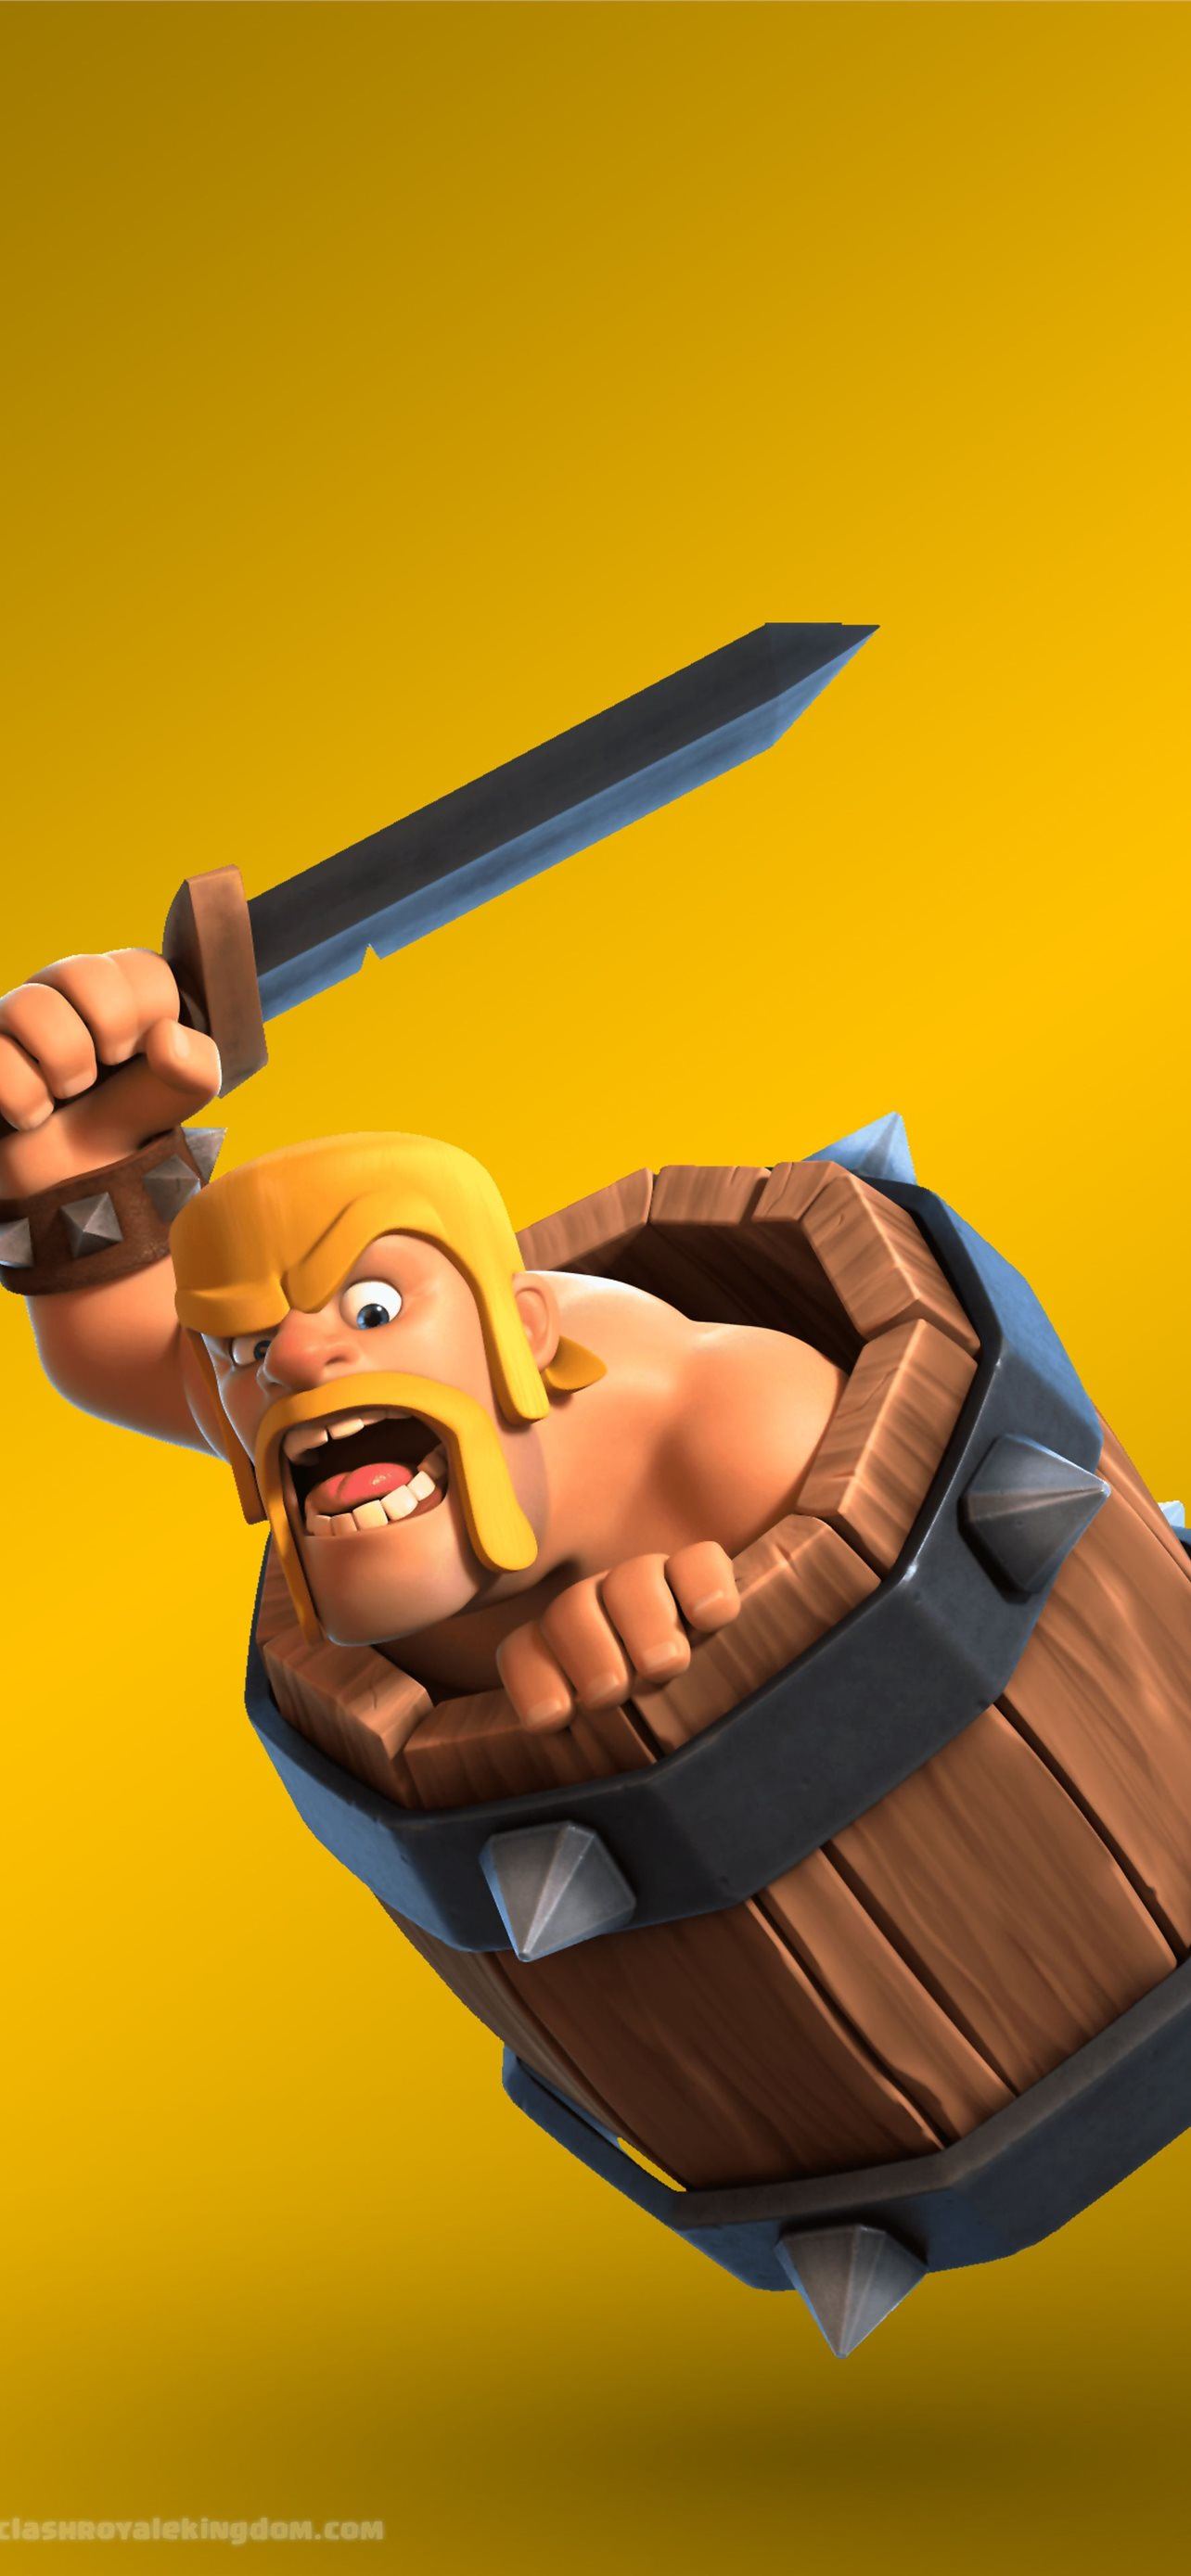 27 Clash of clan ideas iPhone Wallpapers Free Download